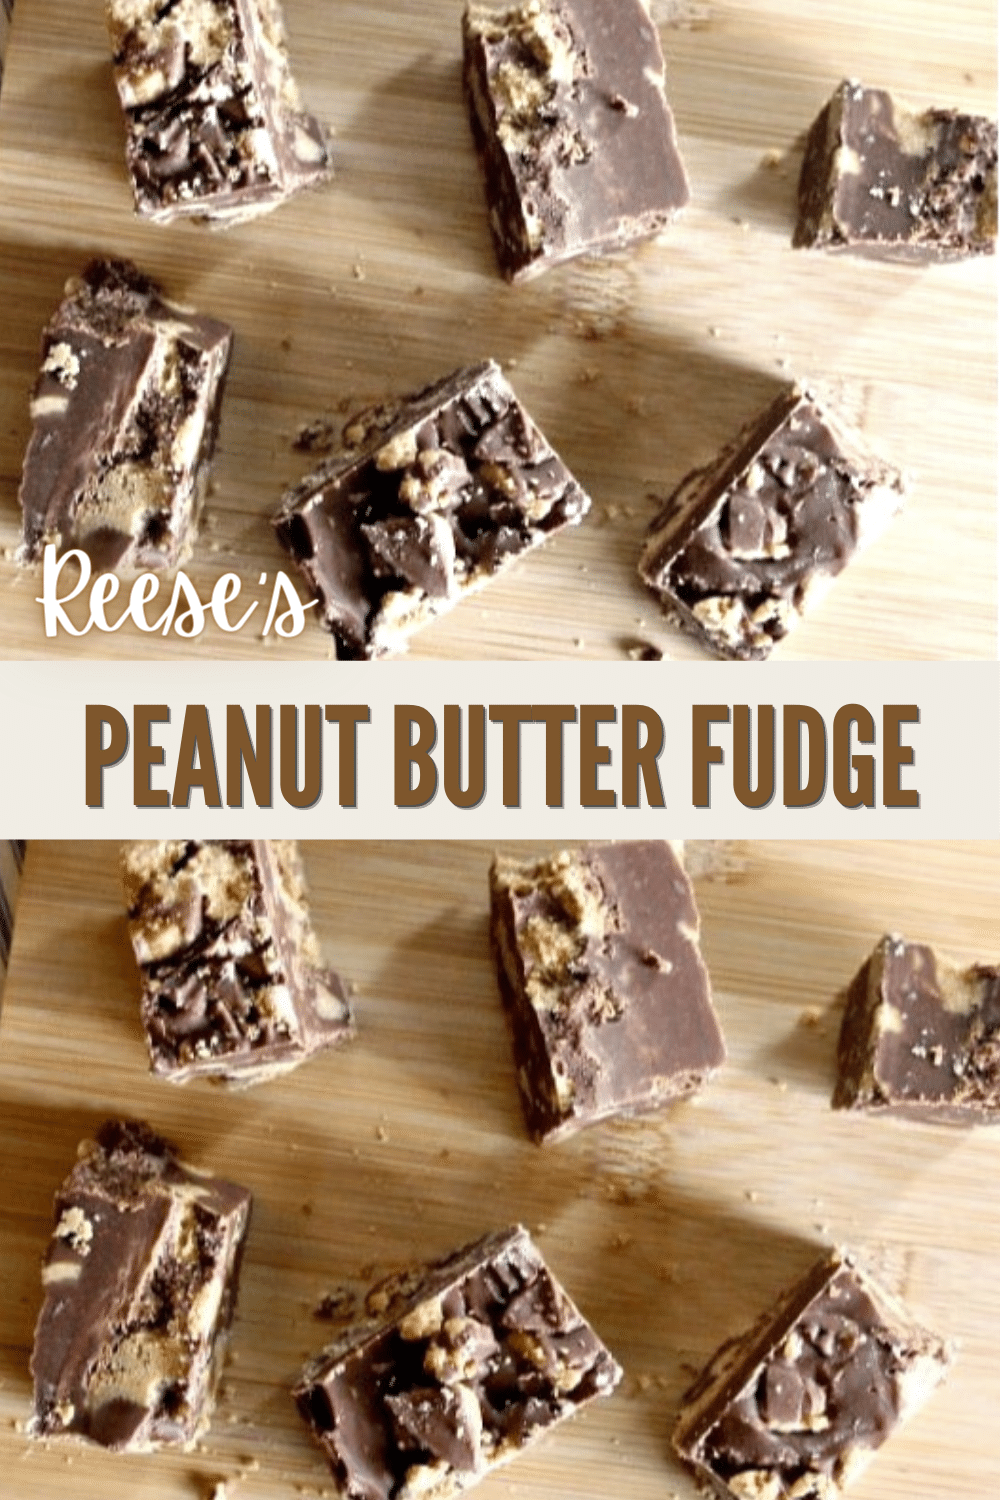 Reese's Peanut Butter Fudge made in the Instant Pot is so easy to make. The result is a rich and delicious fudge your whole family will love. #fudge #reeses #peanutbutter via @wondermomwannab